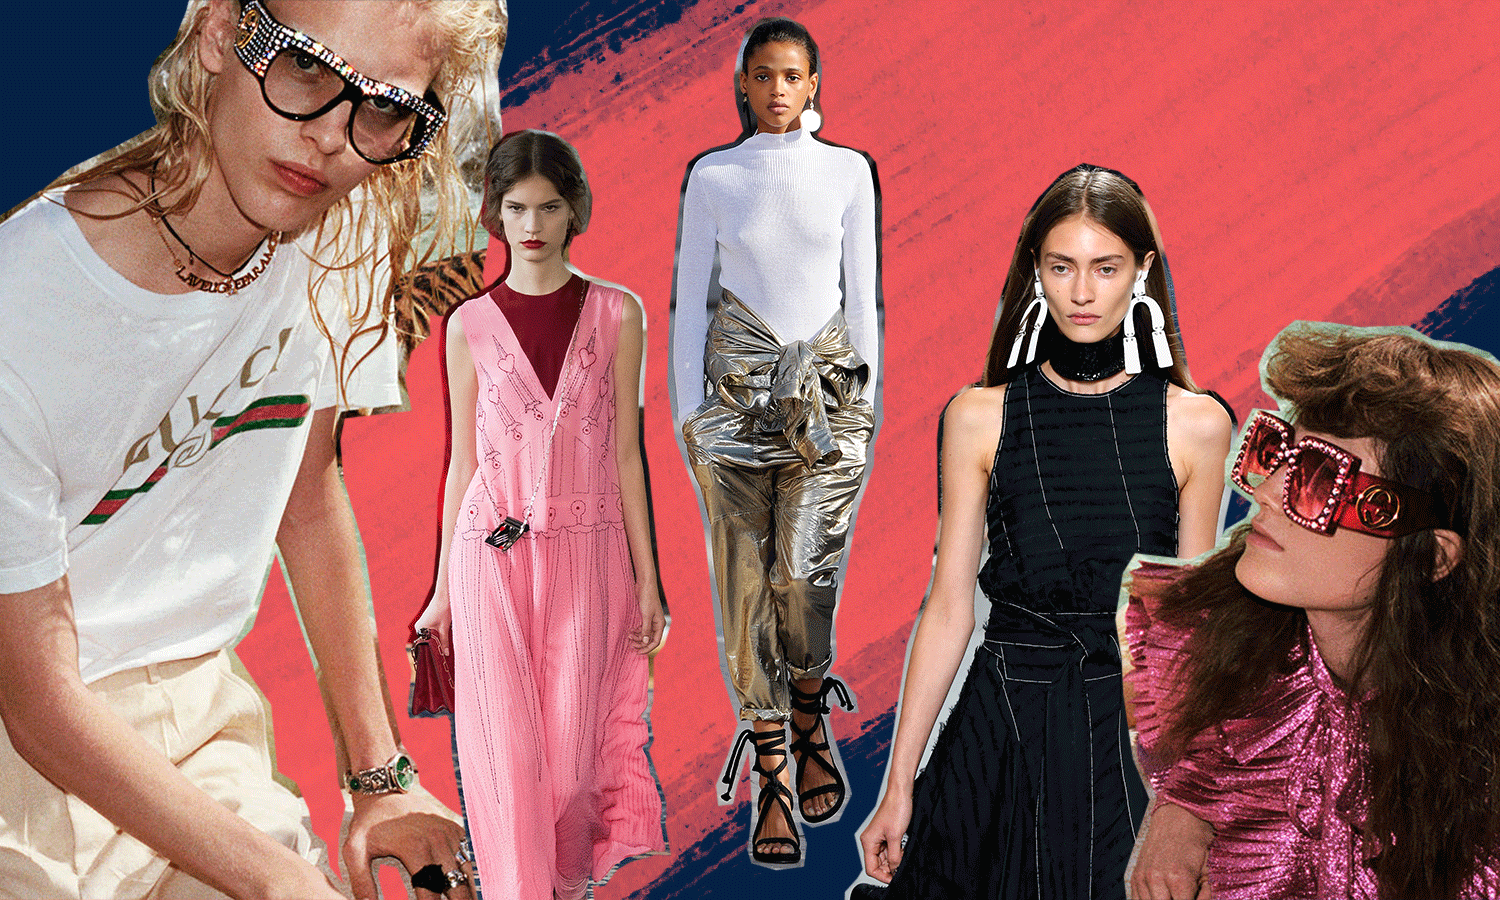 Stylists Reveal What The Biggest Fashion Trends Will Be In 2017 - NYLON